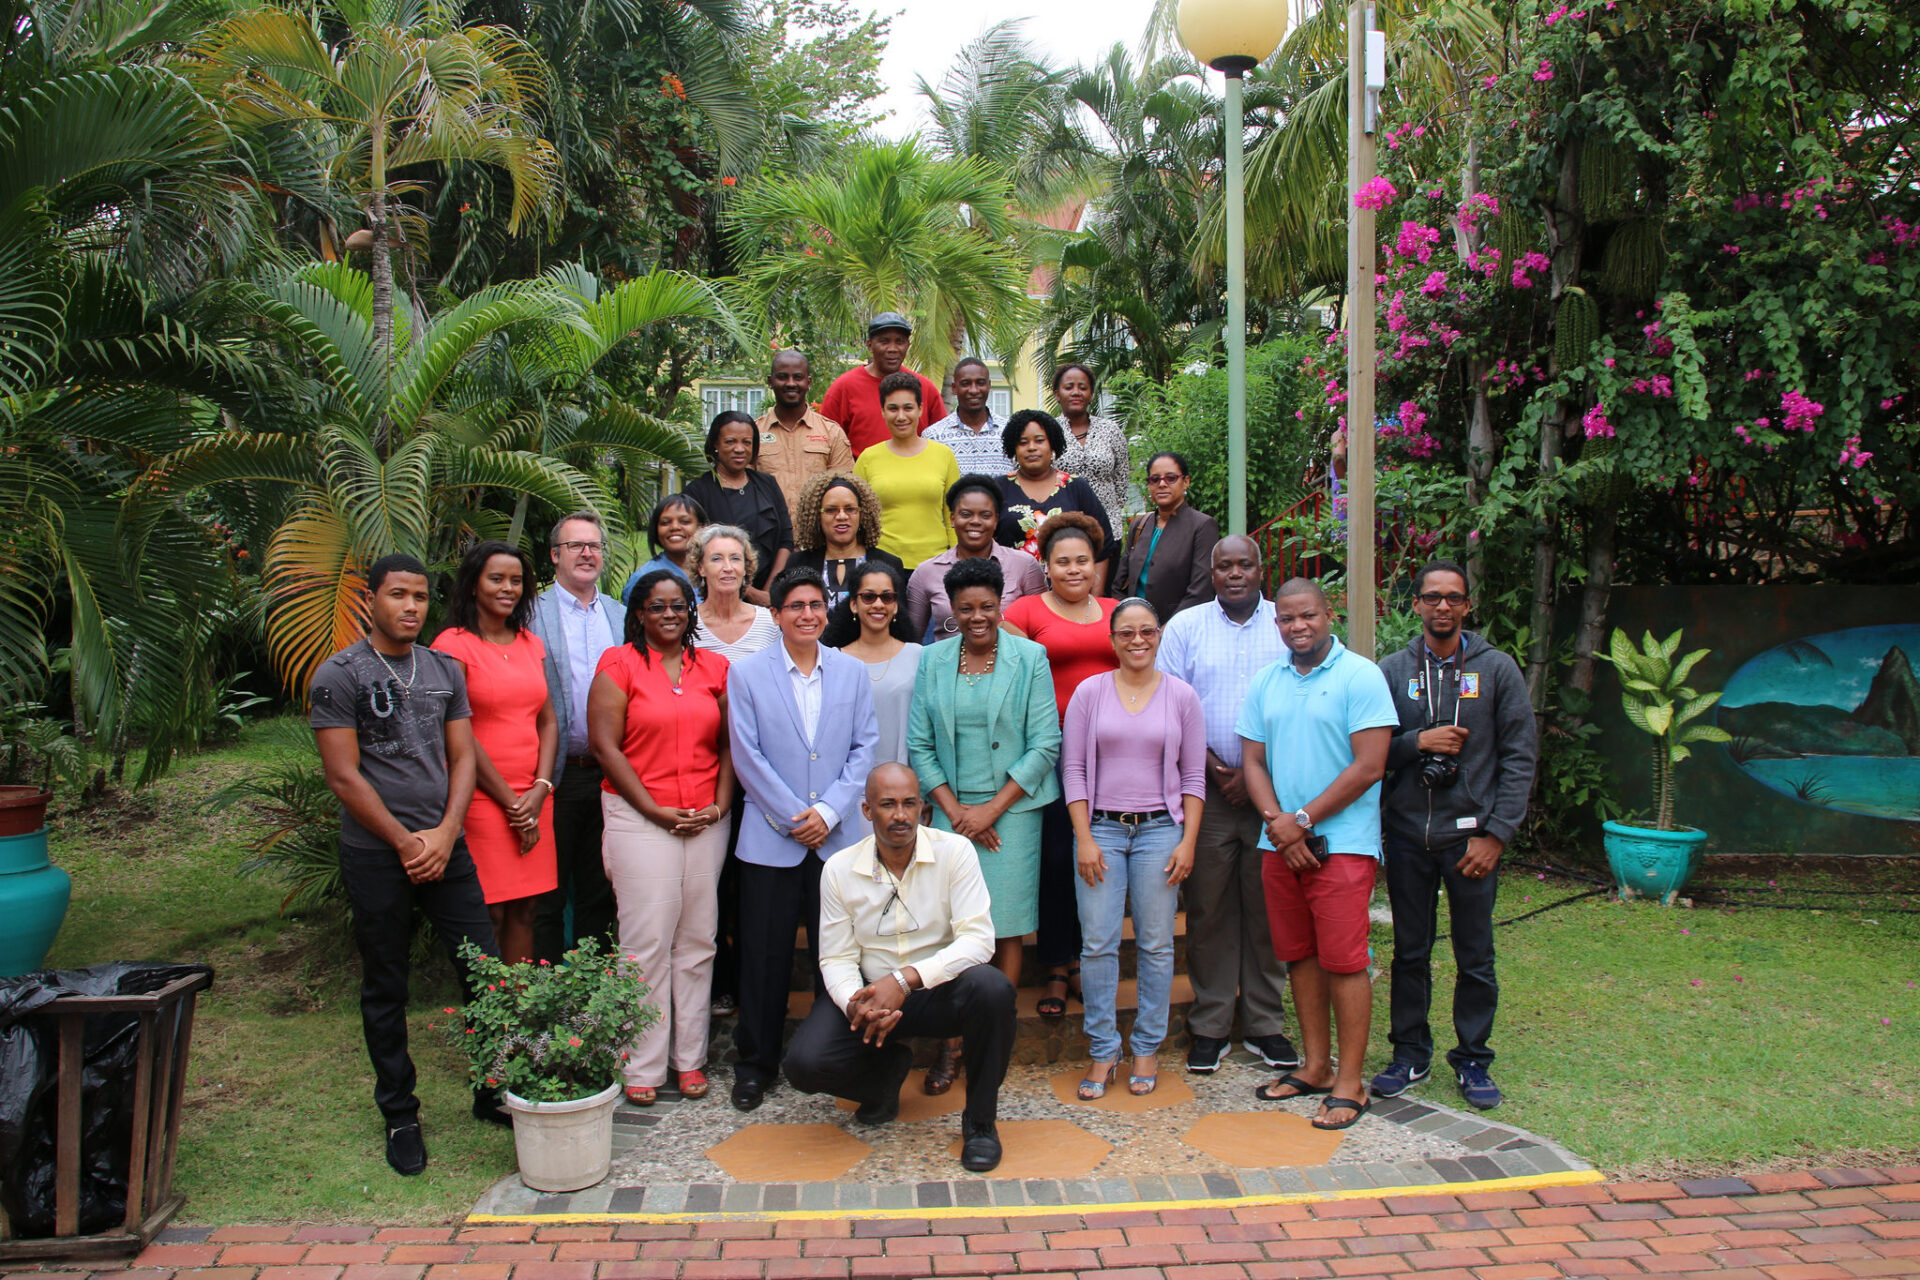 Participants in the June 2017 workshop “Understanding Climate Change Adaptation in the Saint Lucia Context: A briefing for journalists” in Castries.